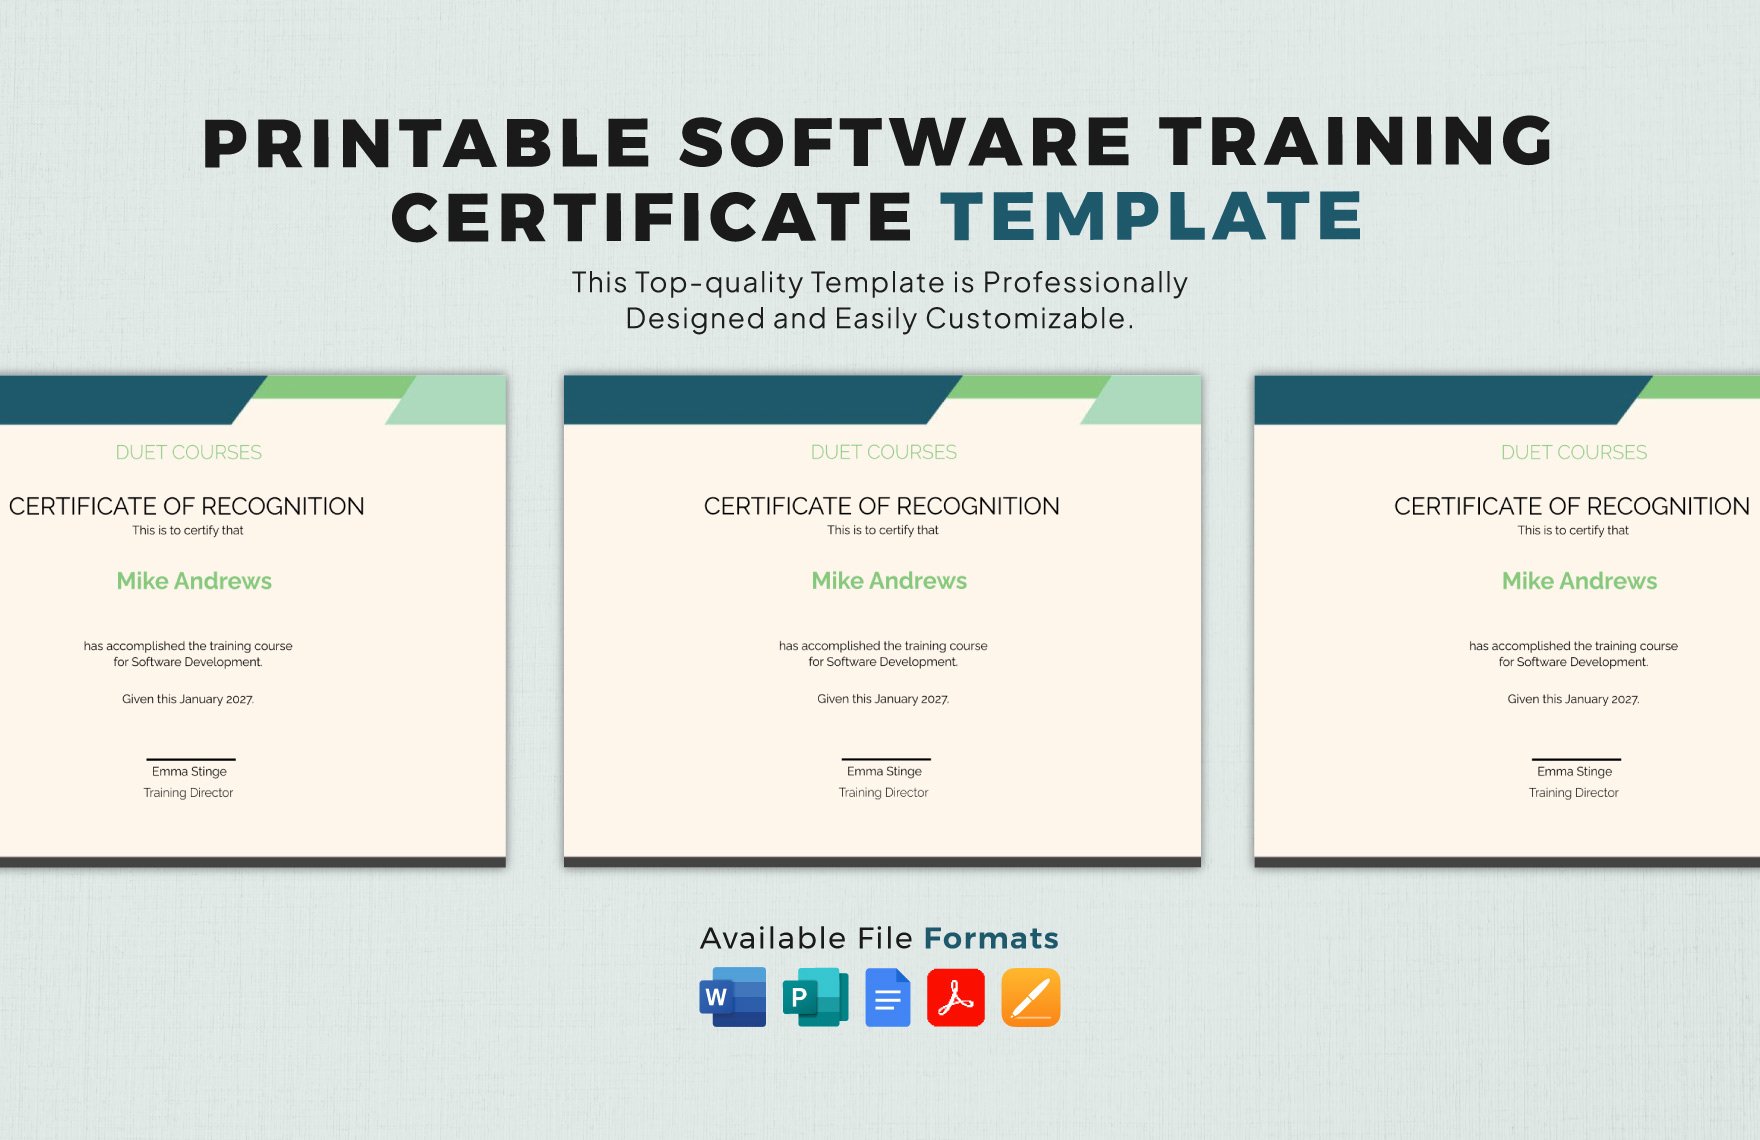 Printable Software Training Certificate Template